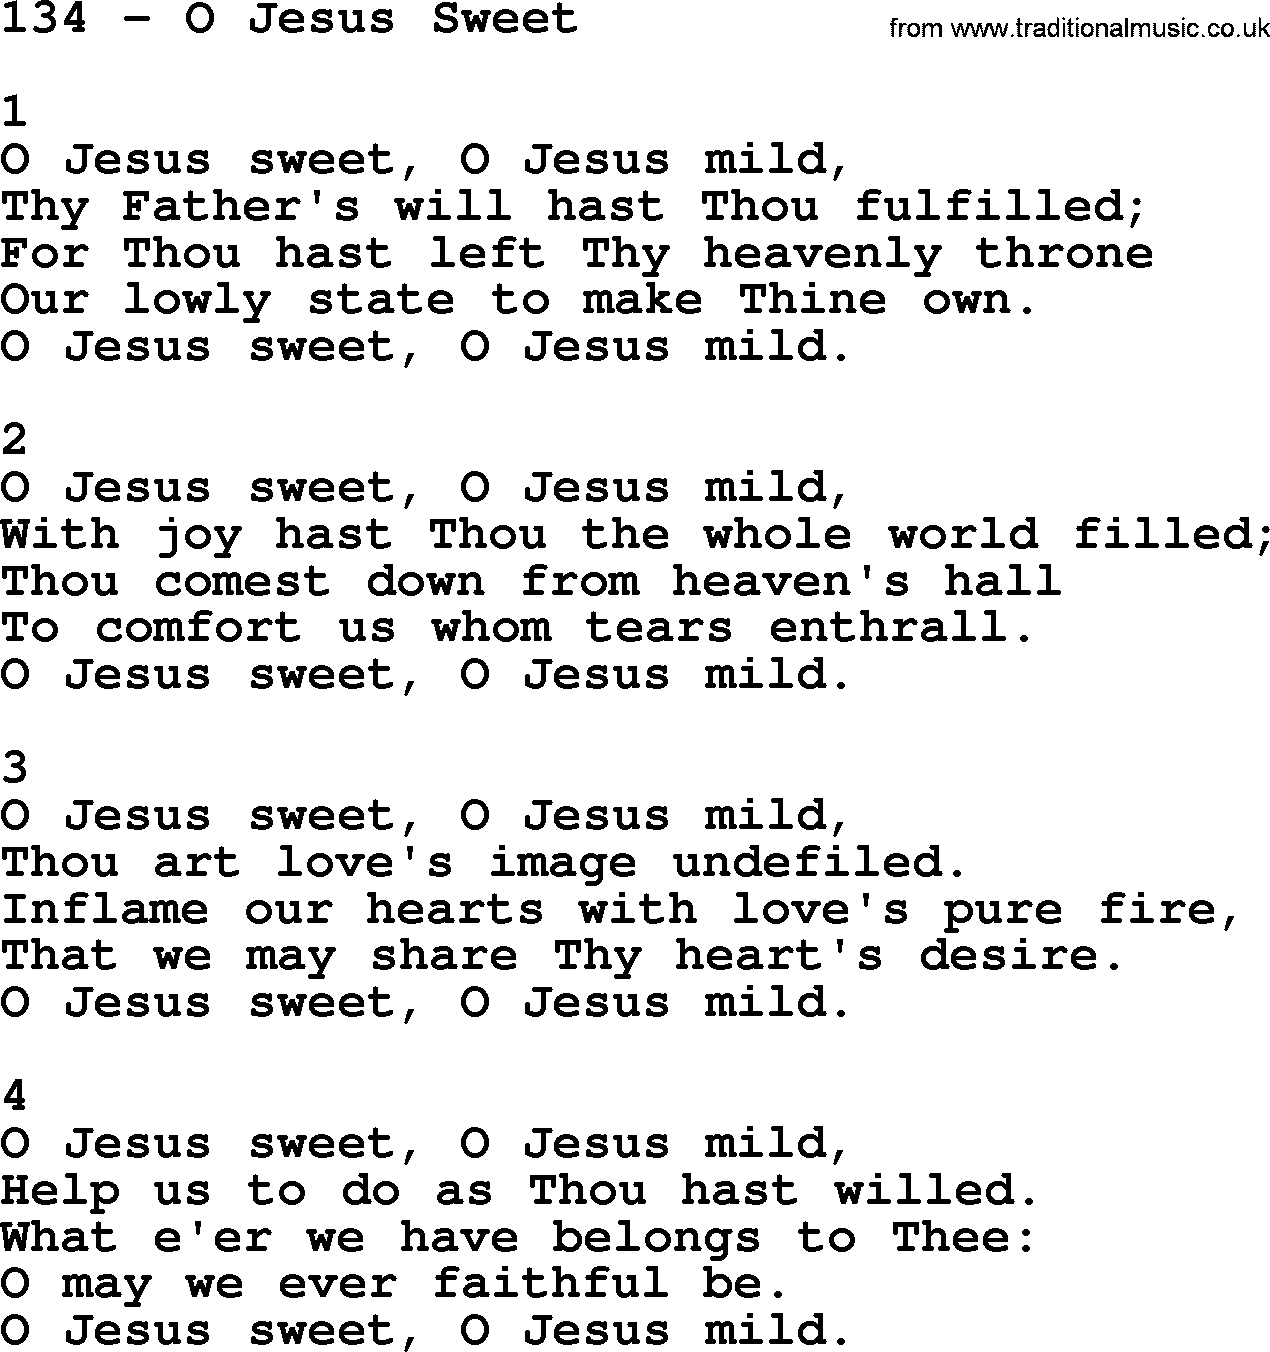 Complete Adventis Hymnal, title: 134-O Jesus Sweet, with lyrics, midi, mp3, powerpoints(PPT) and PDF,